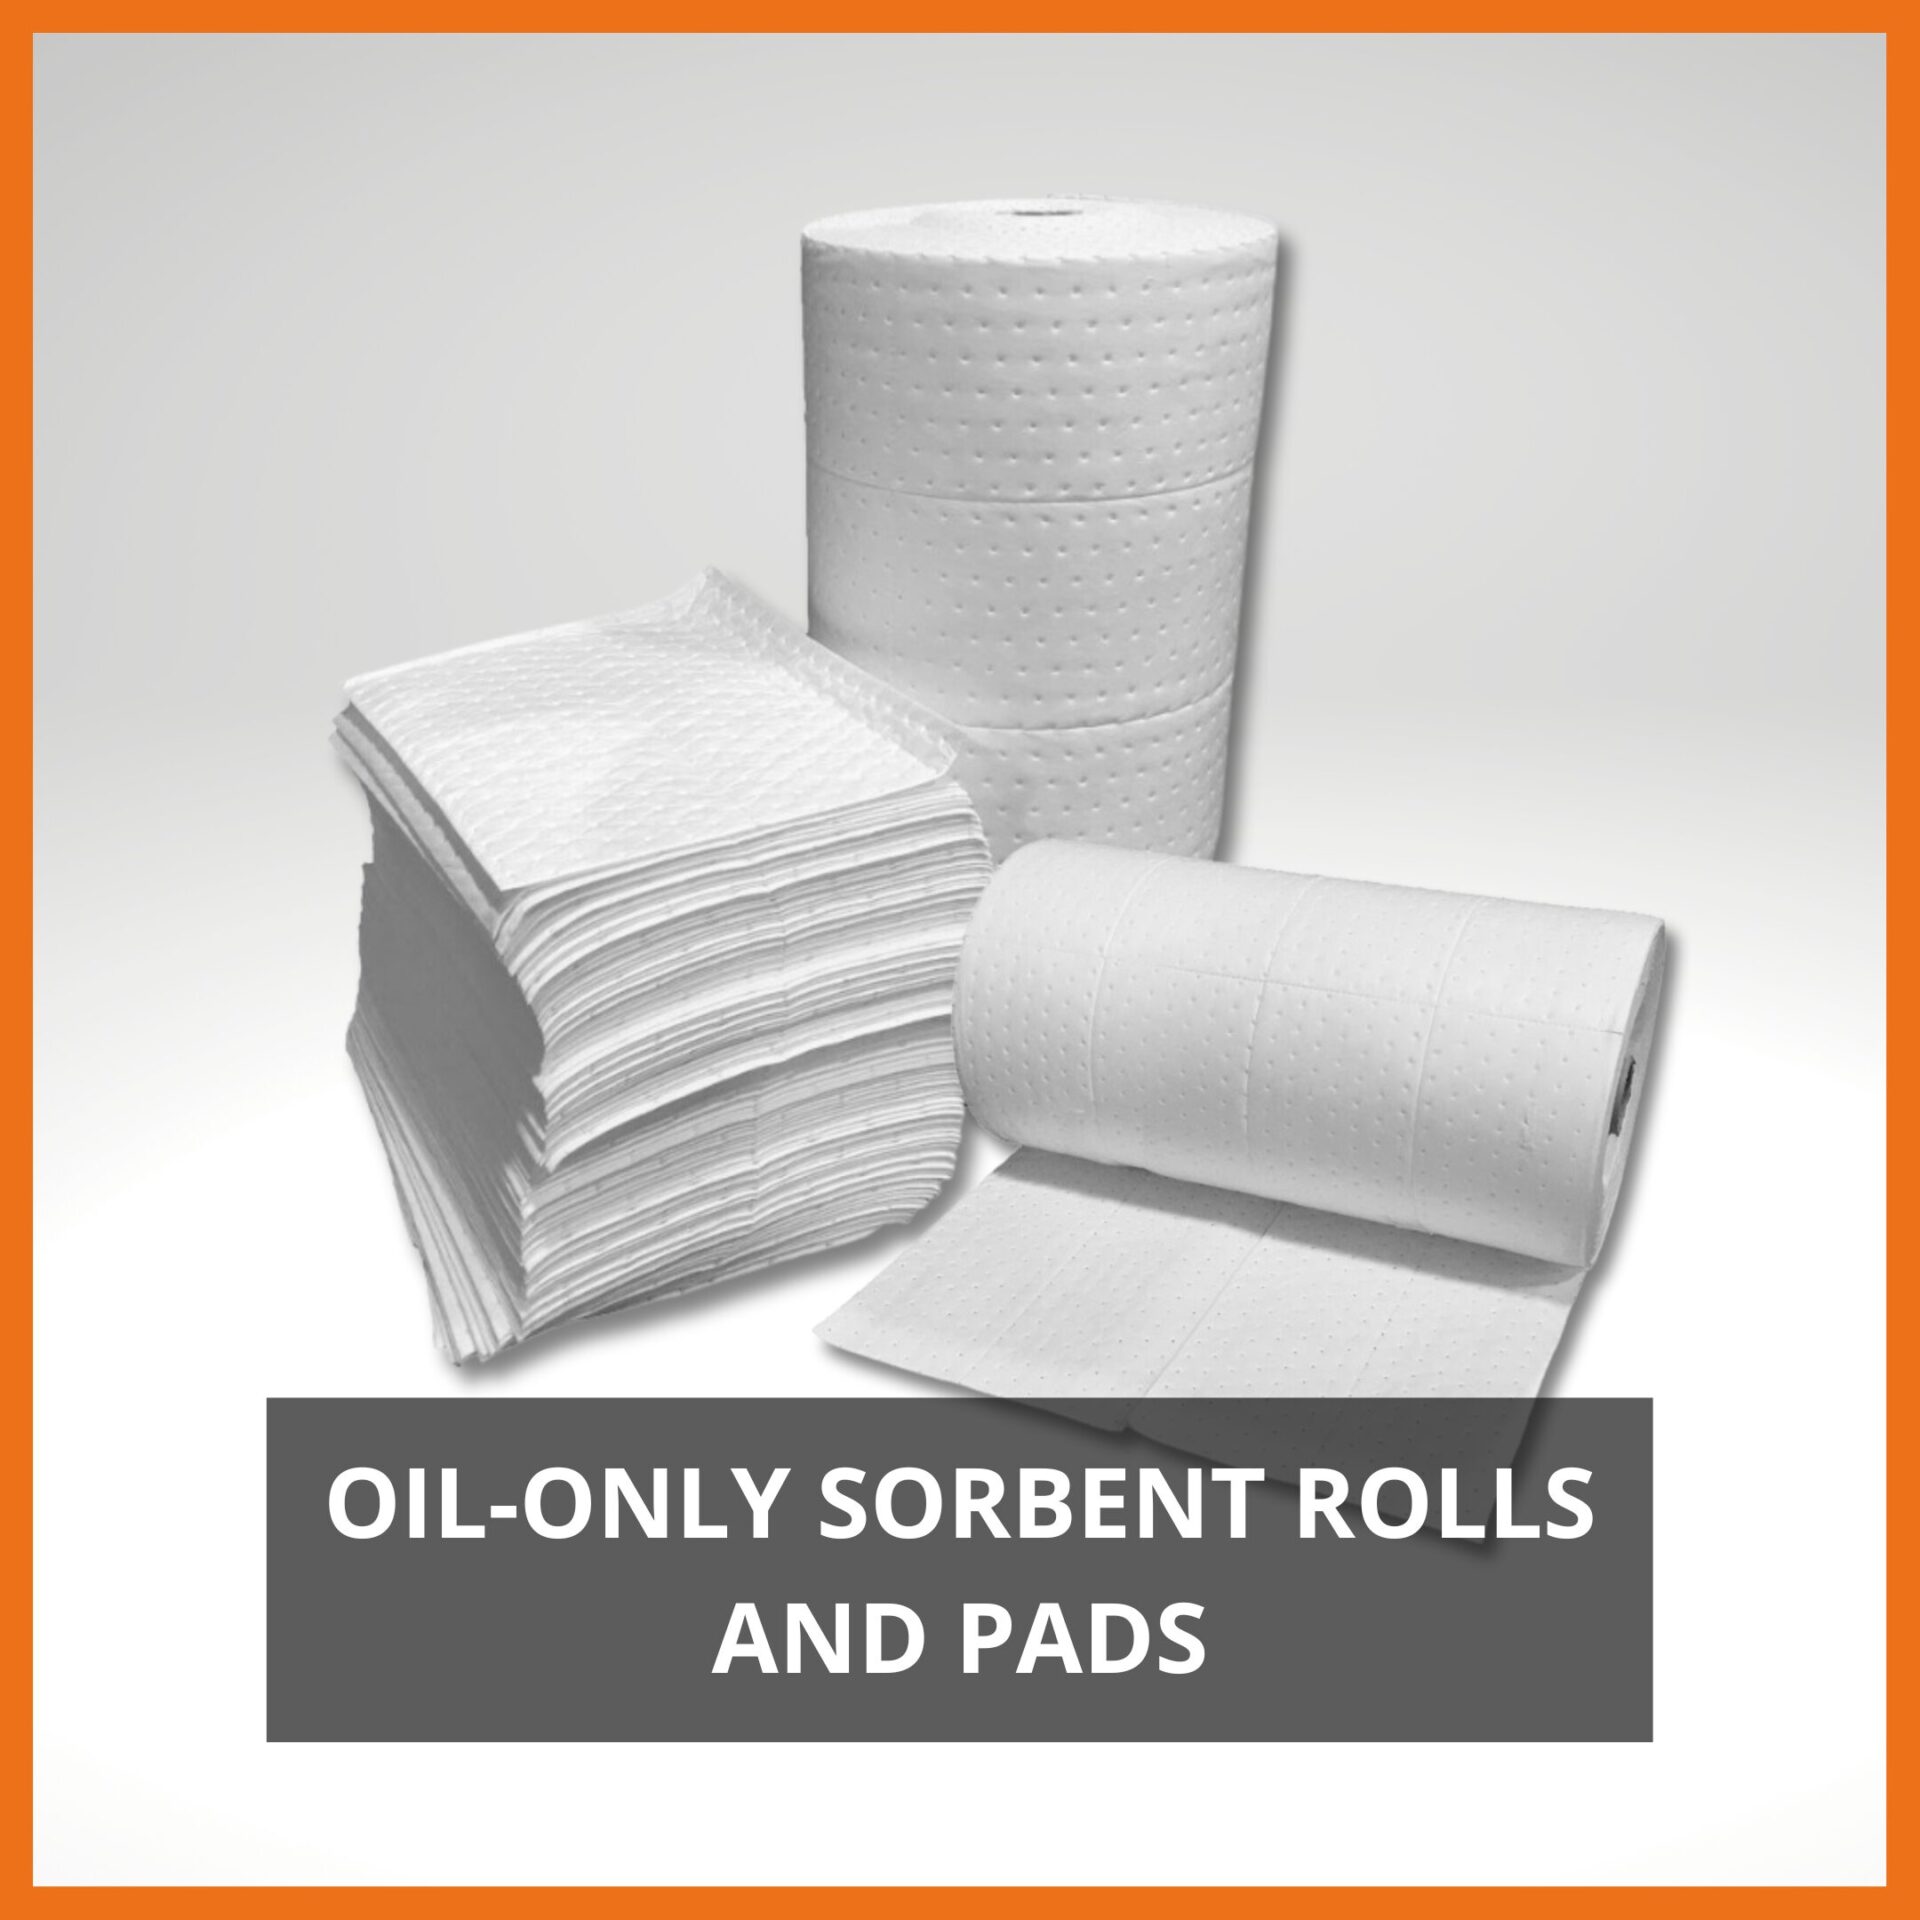 Oil-Only Polypropylene Sorbents Pads and Rolls